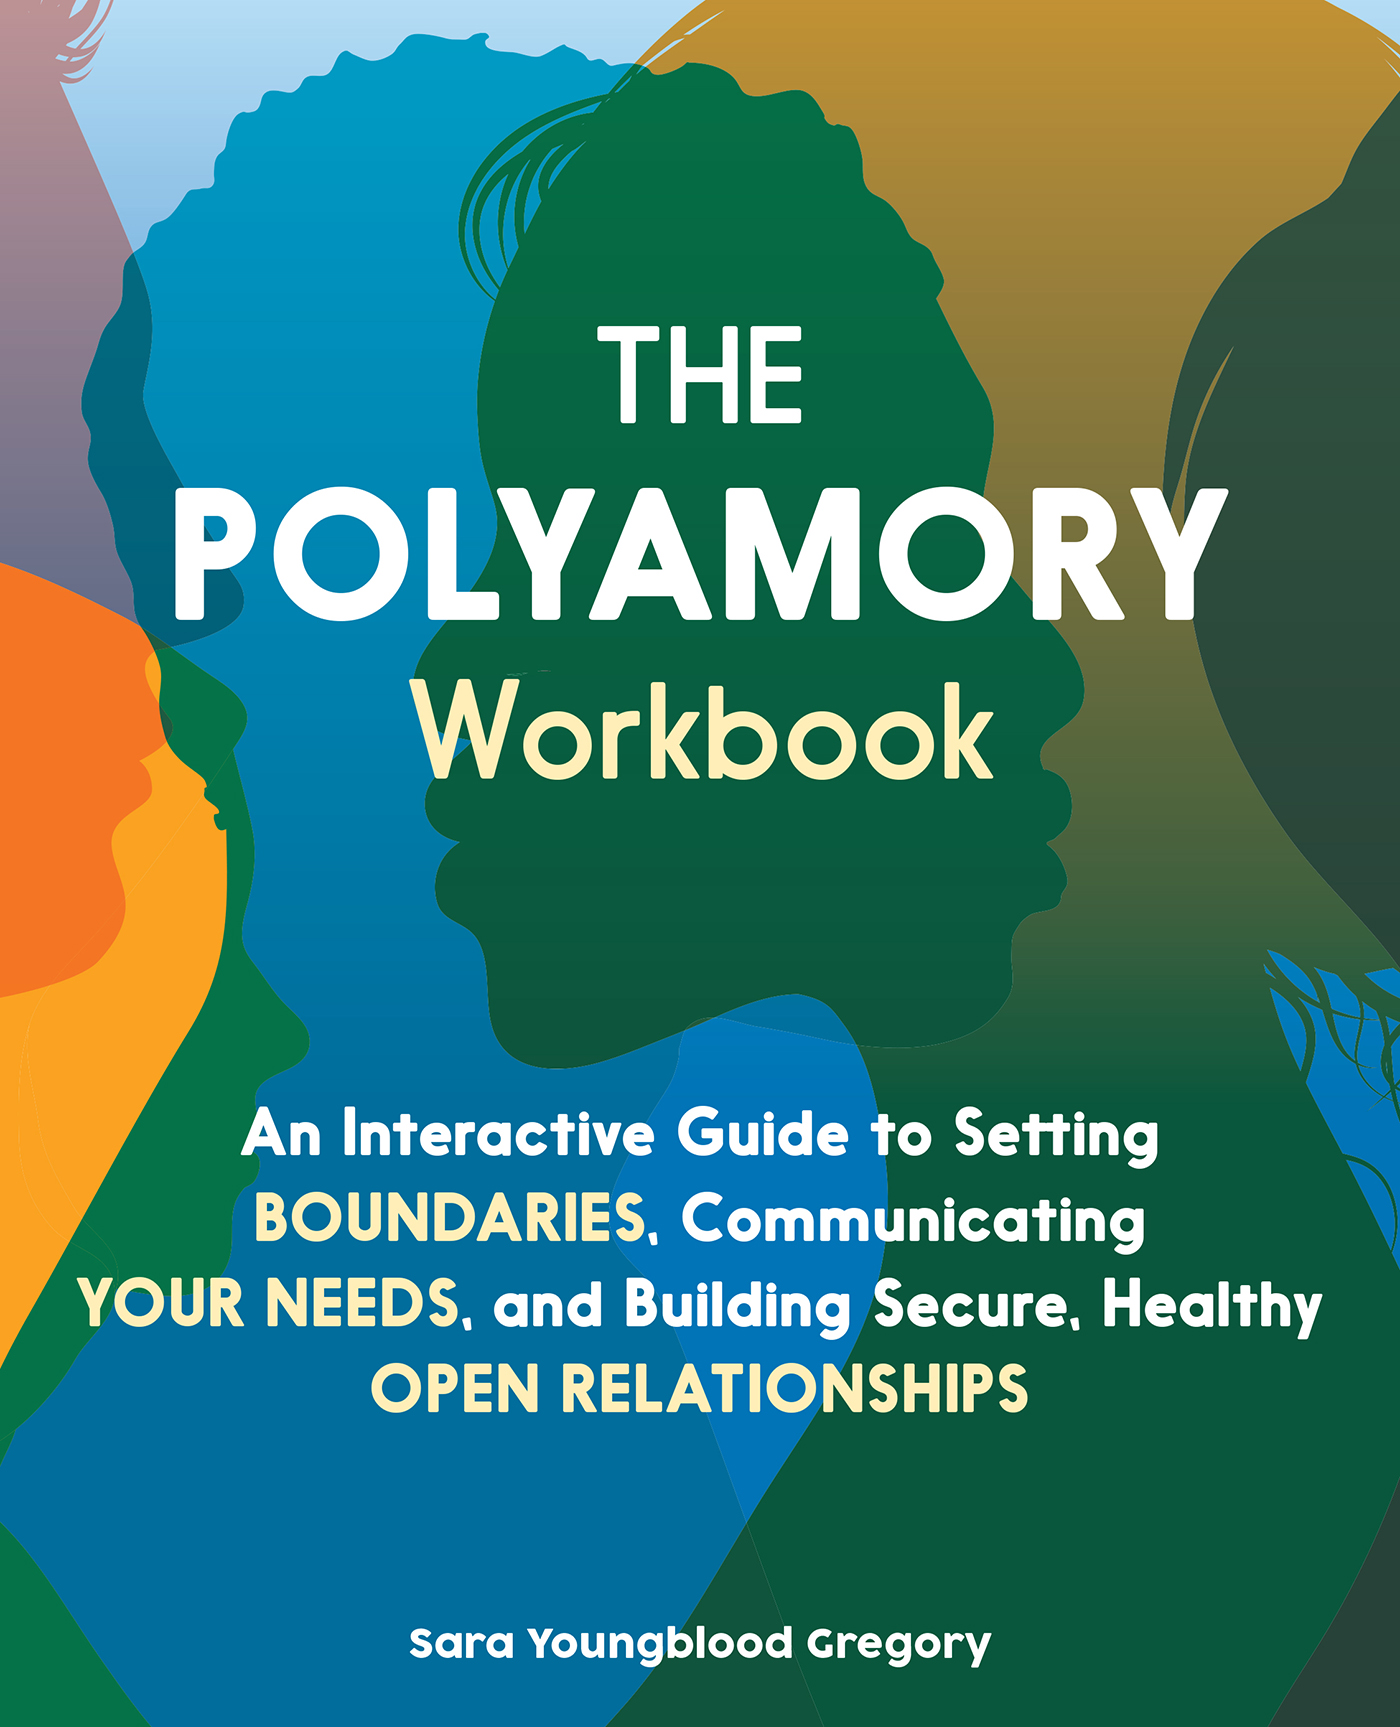 Polyamory Workbook-front.indd